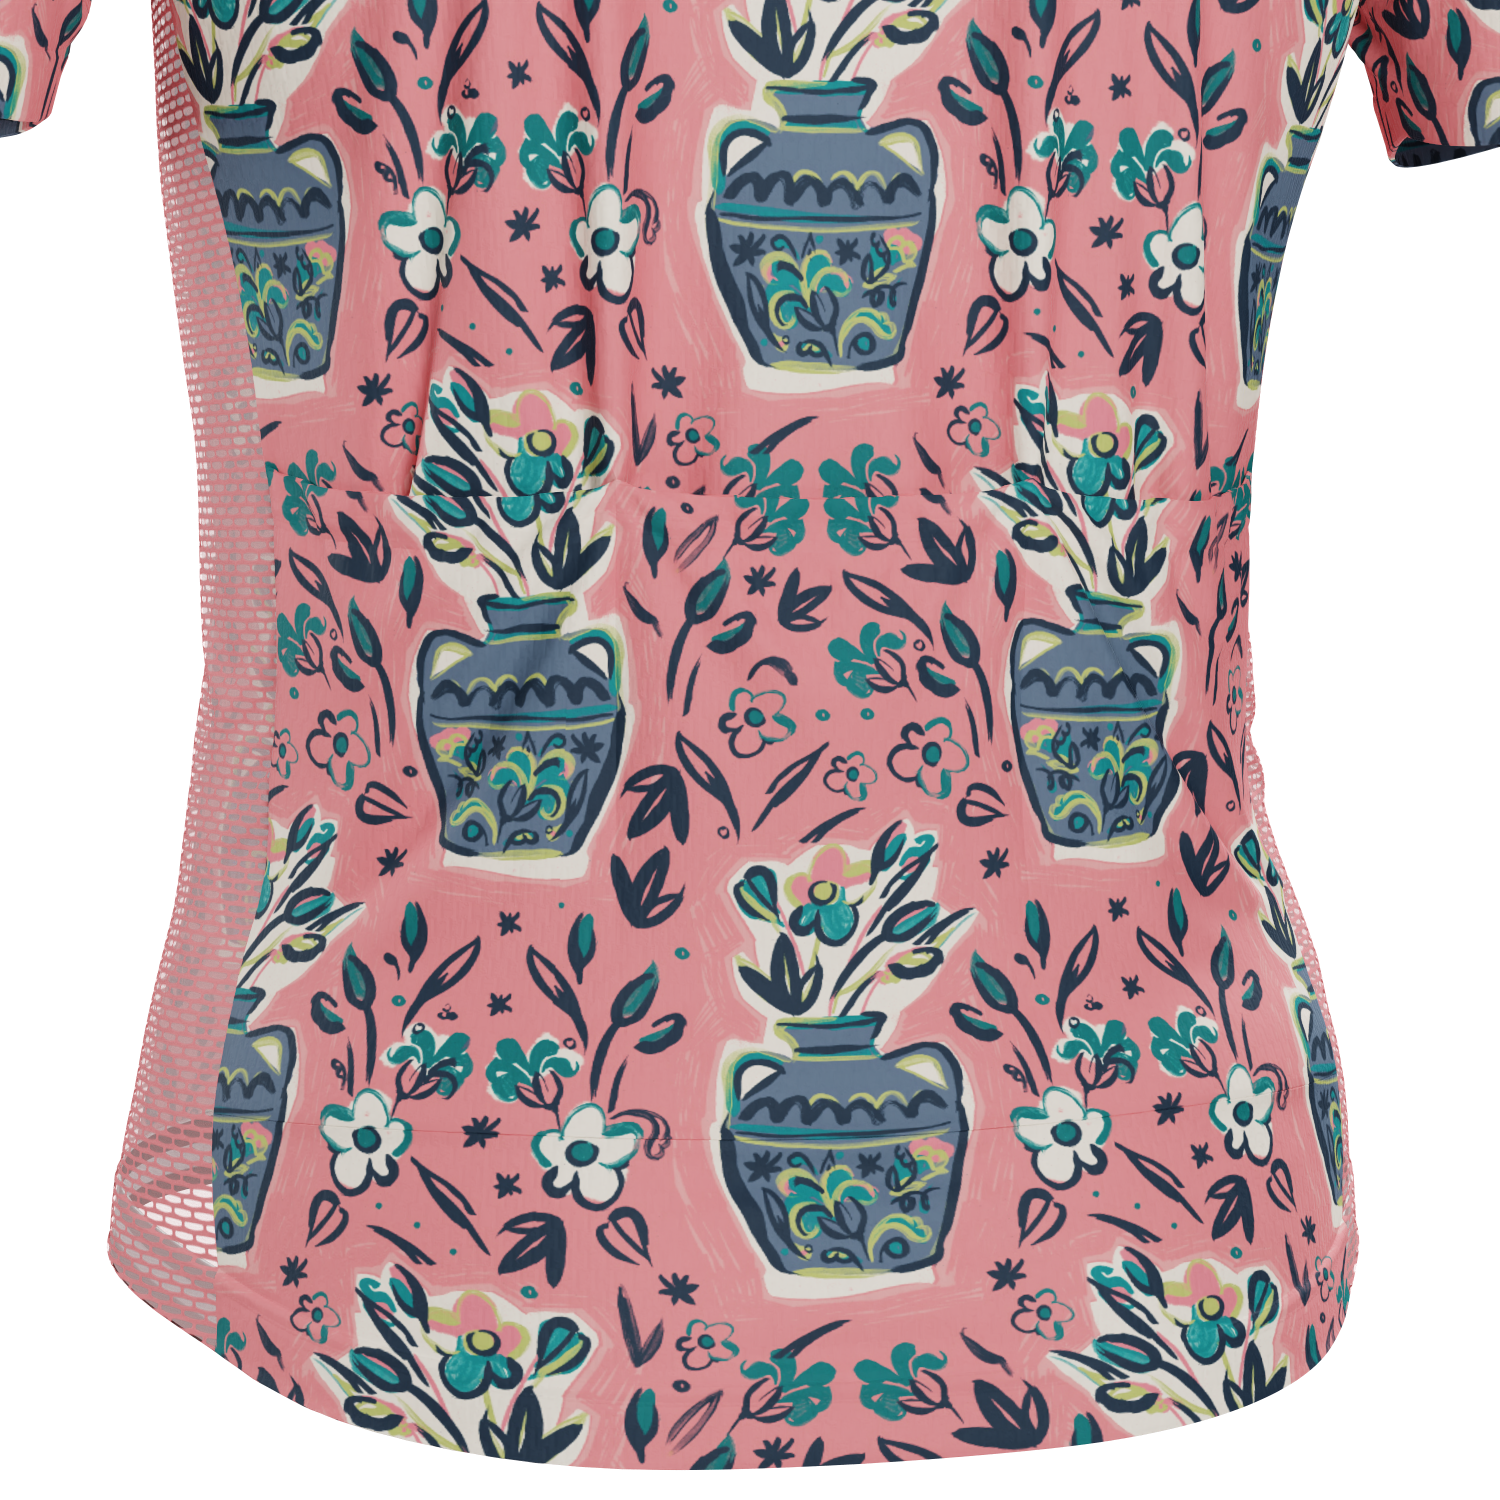 Men's Vases & Flowers Short Sleeve Cycling Jersey